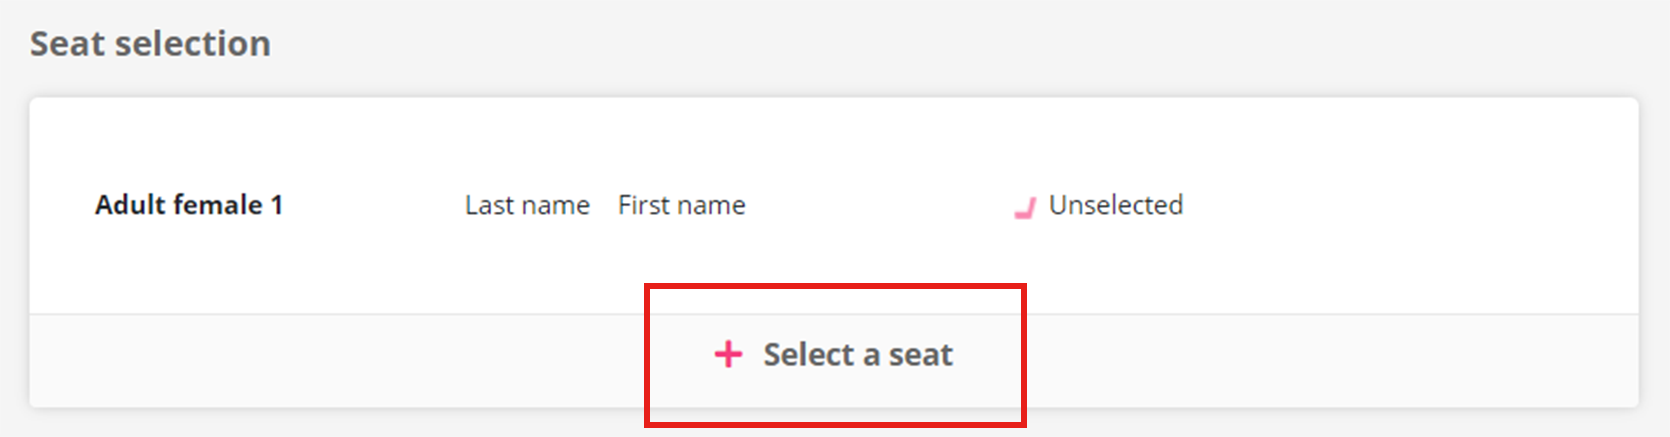 Click "Select a seat" and choose the seats for all passengers.